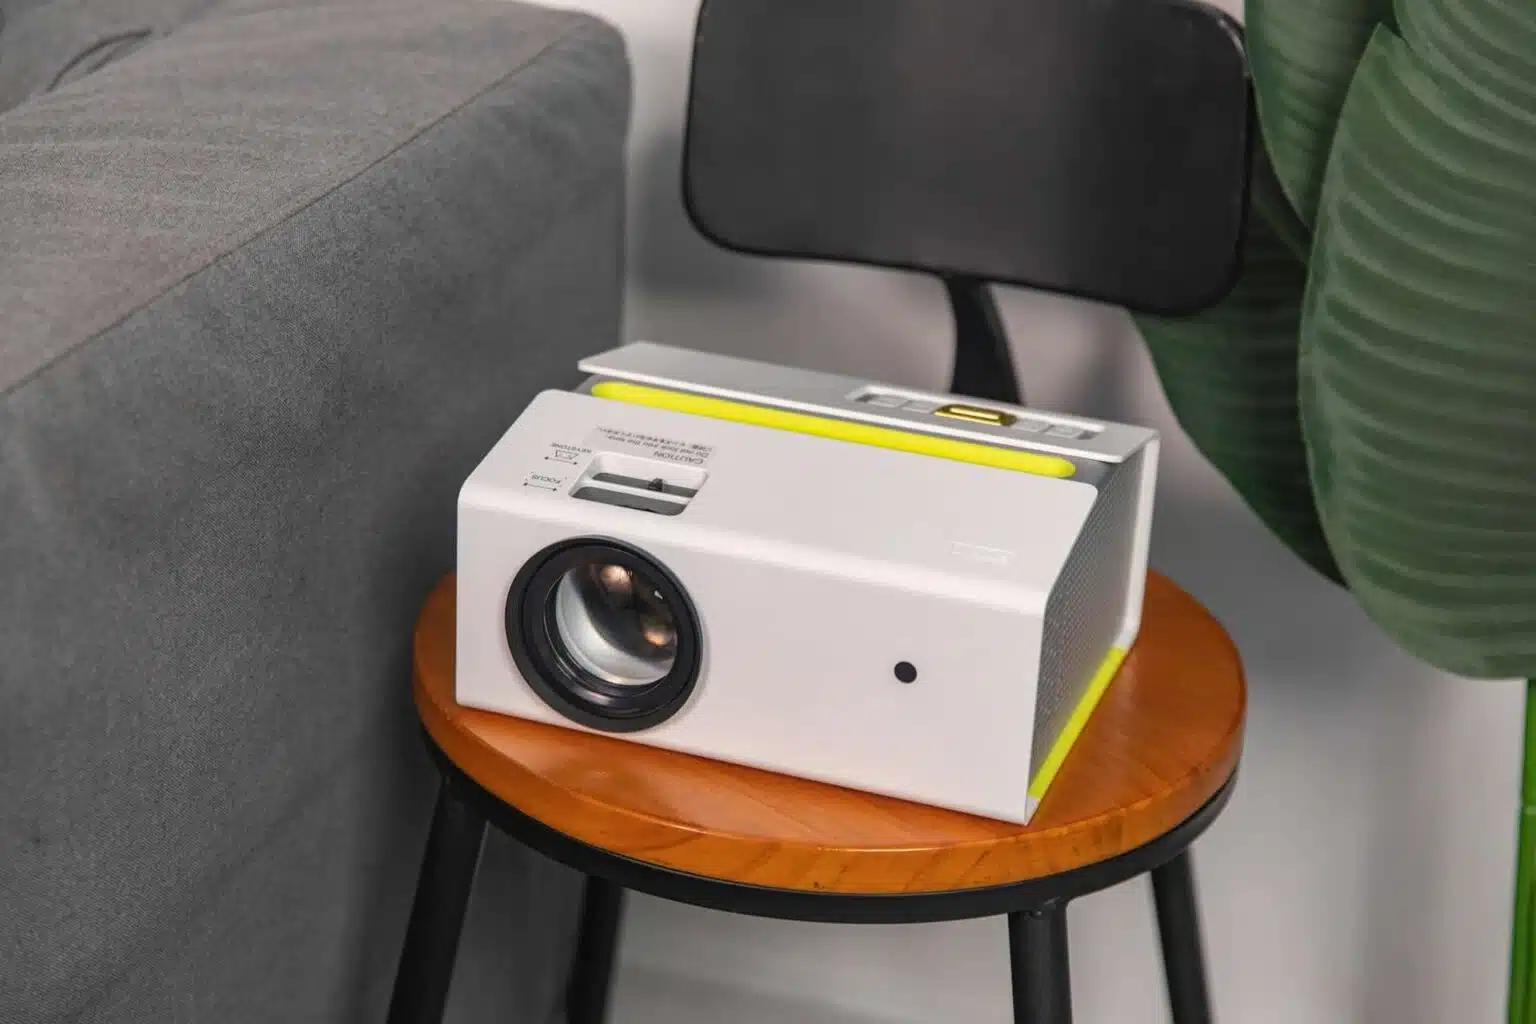 How To Make A Homemade Projector Without A Magnifying Glass